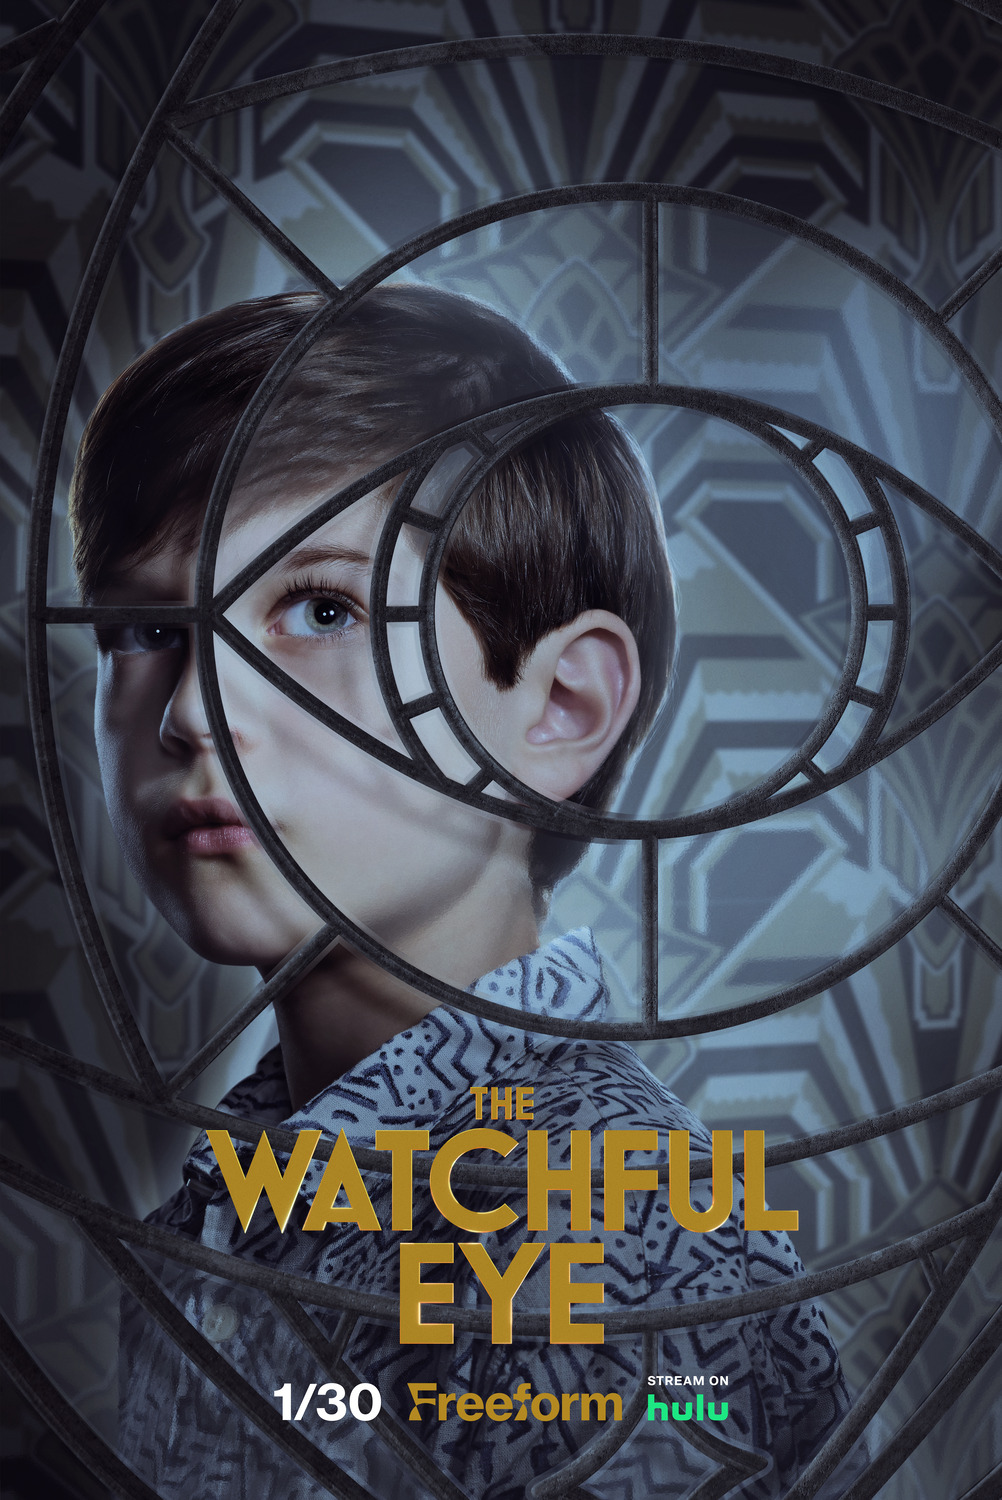 Extra Large TV Poster Image for The Watchful Eye (#7 of 10)